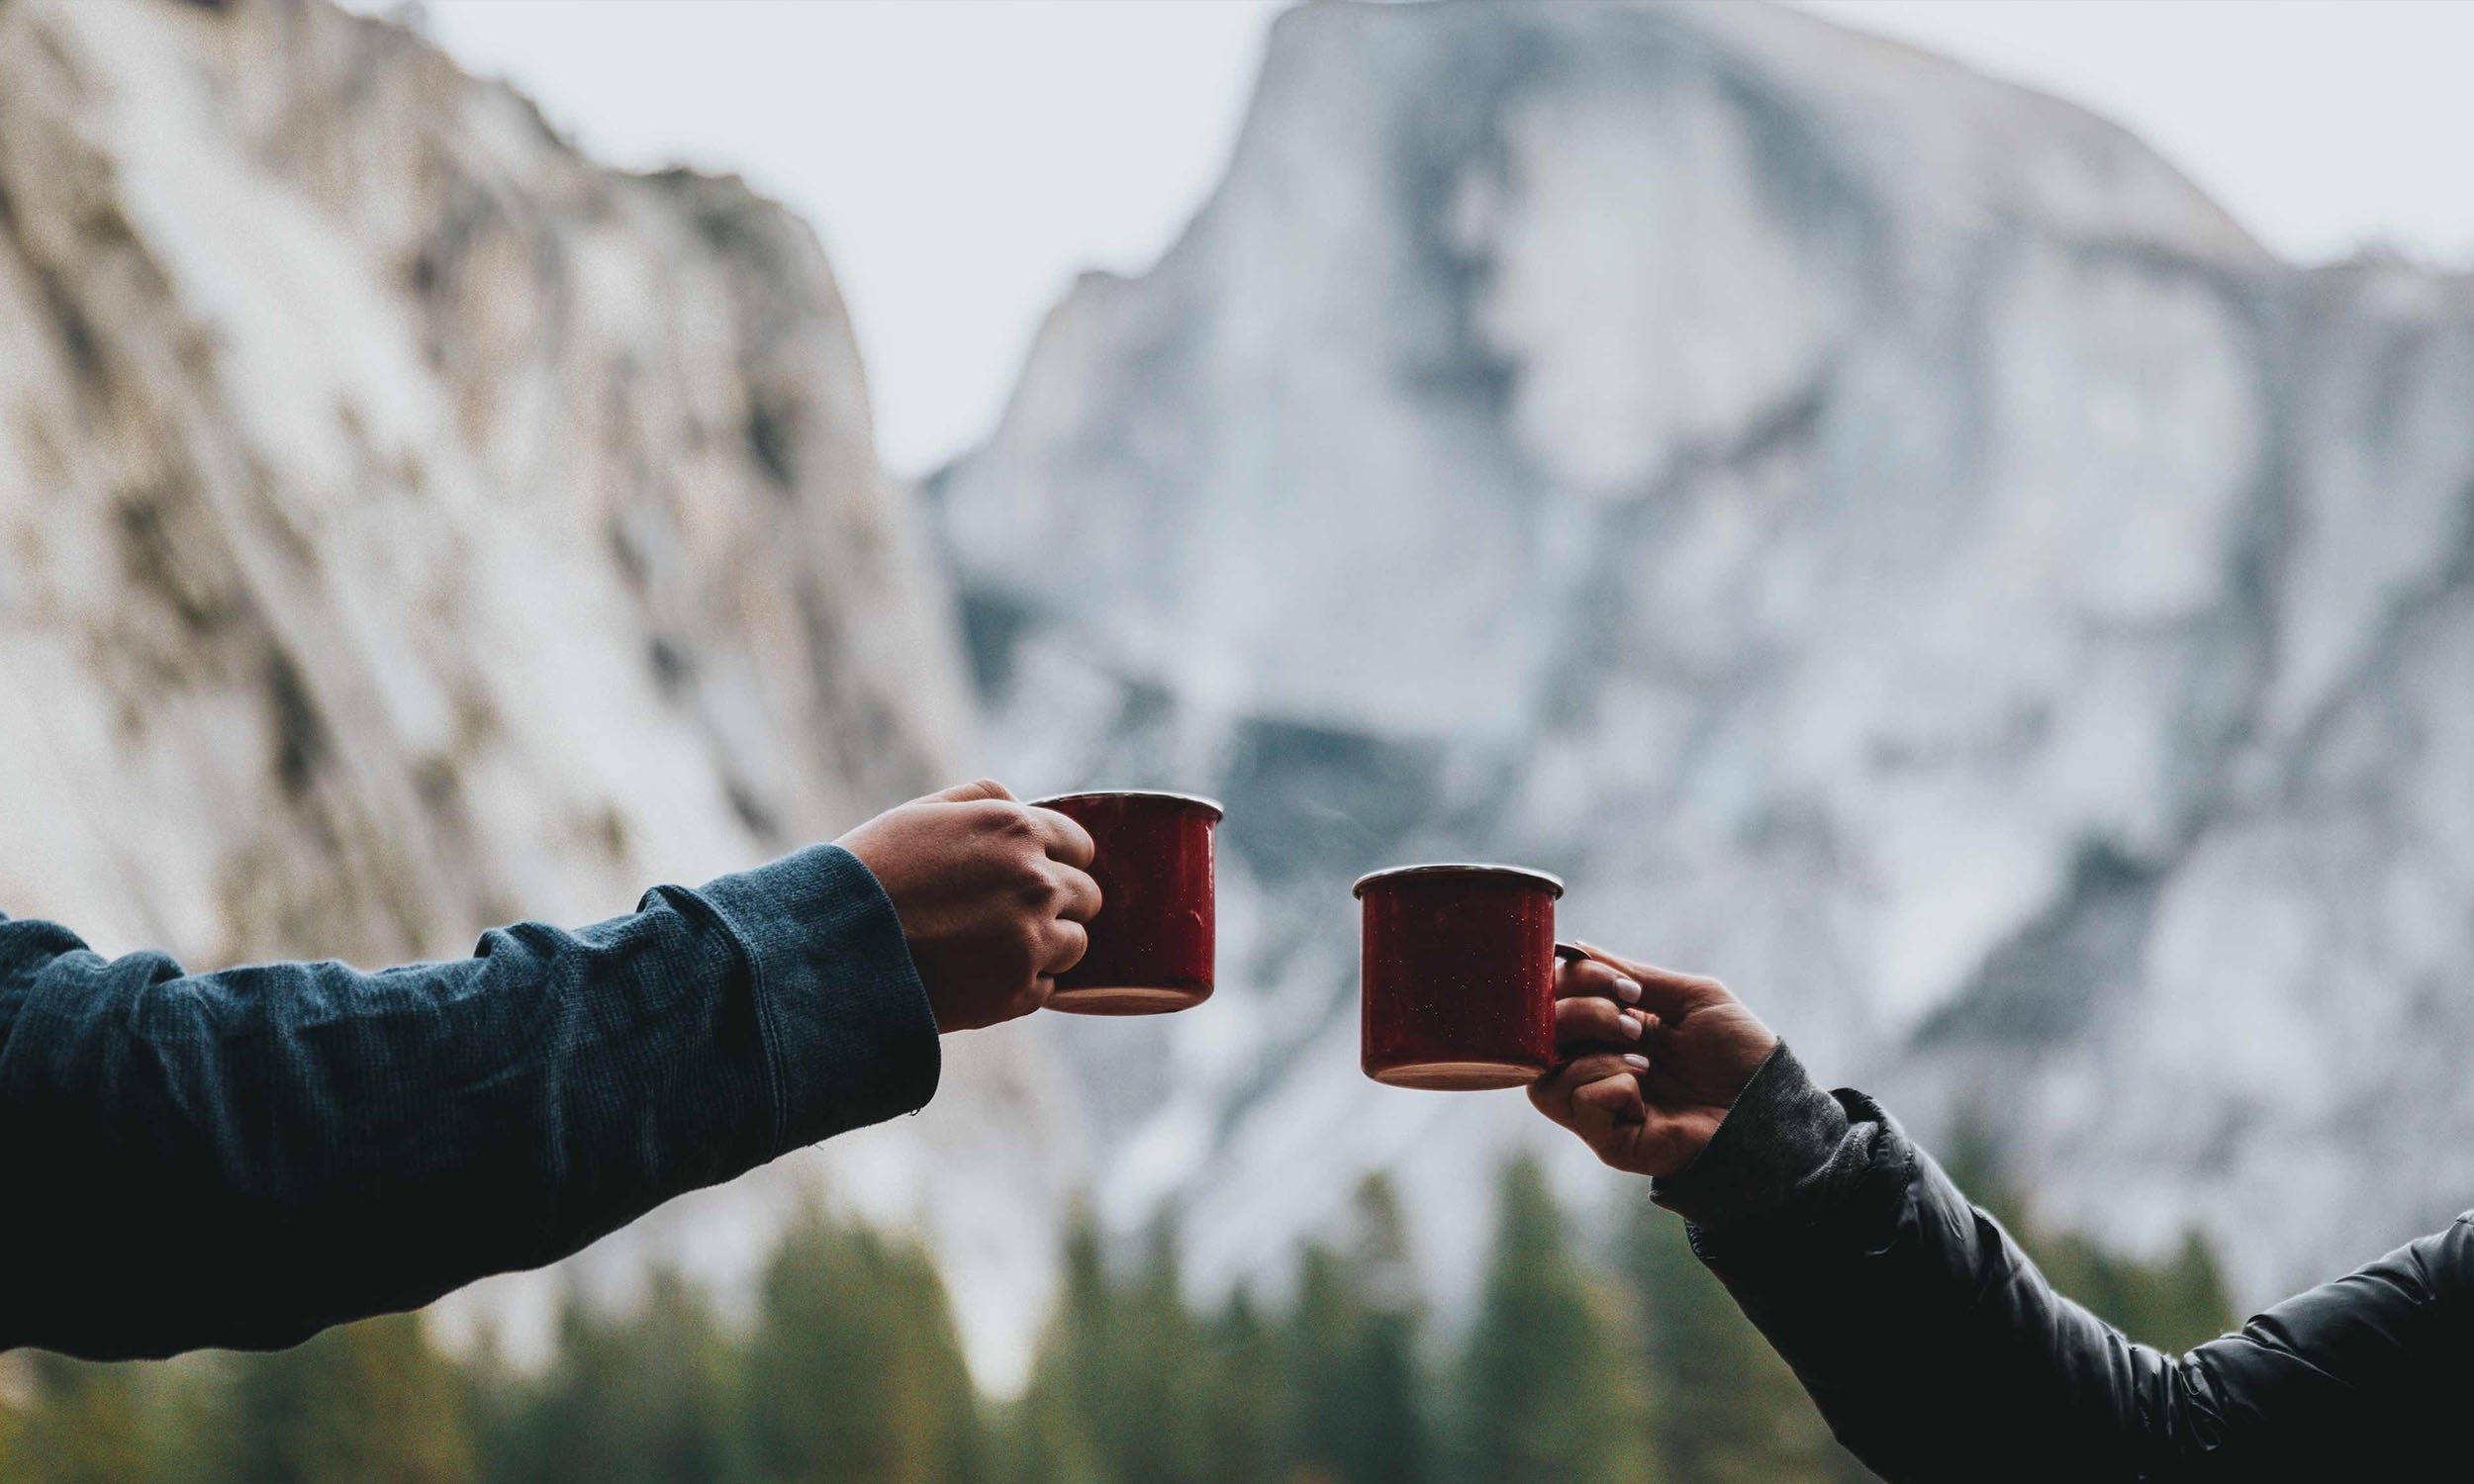 Image of two hands holding coffee mugs in front of a mountain range.